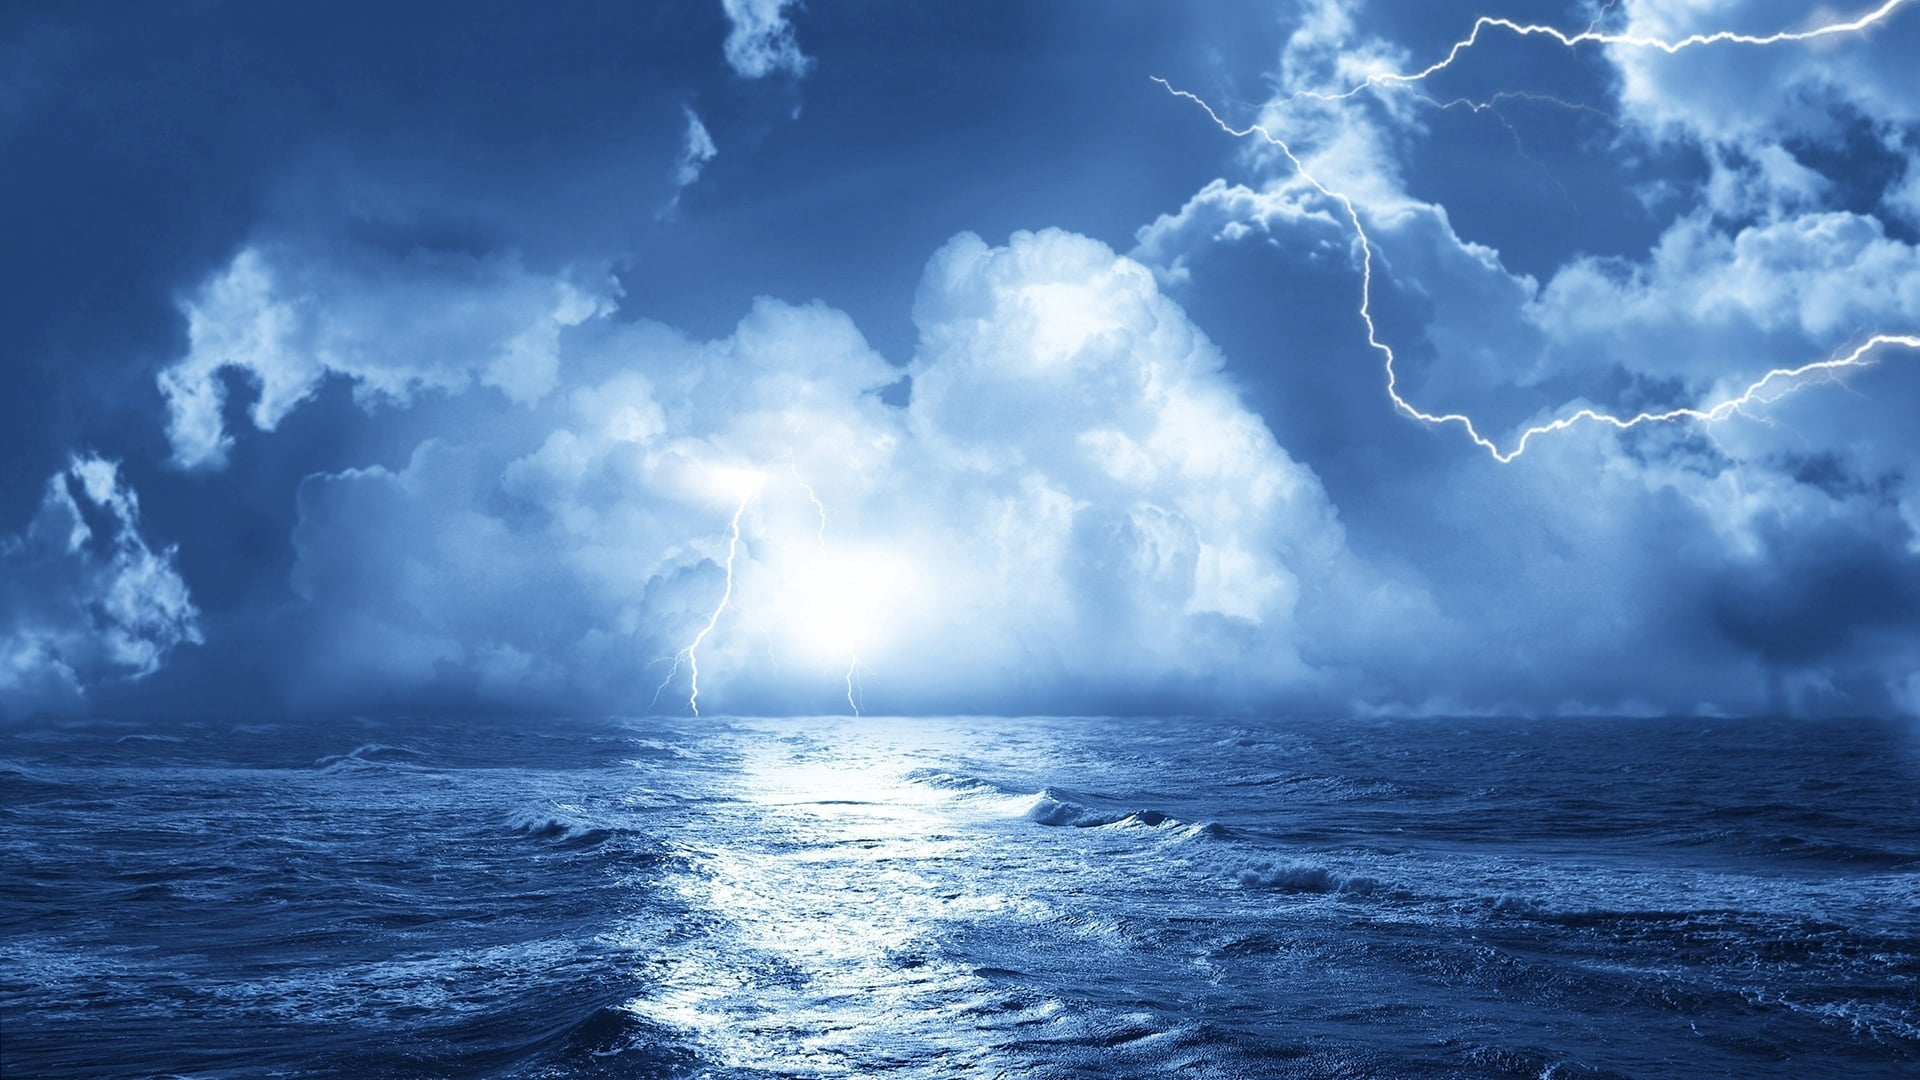 blue body of water, lightning, sea, storm, clouds, waves, elements